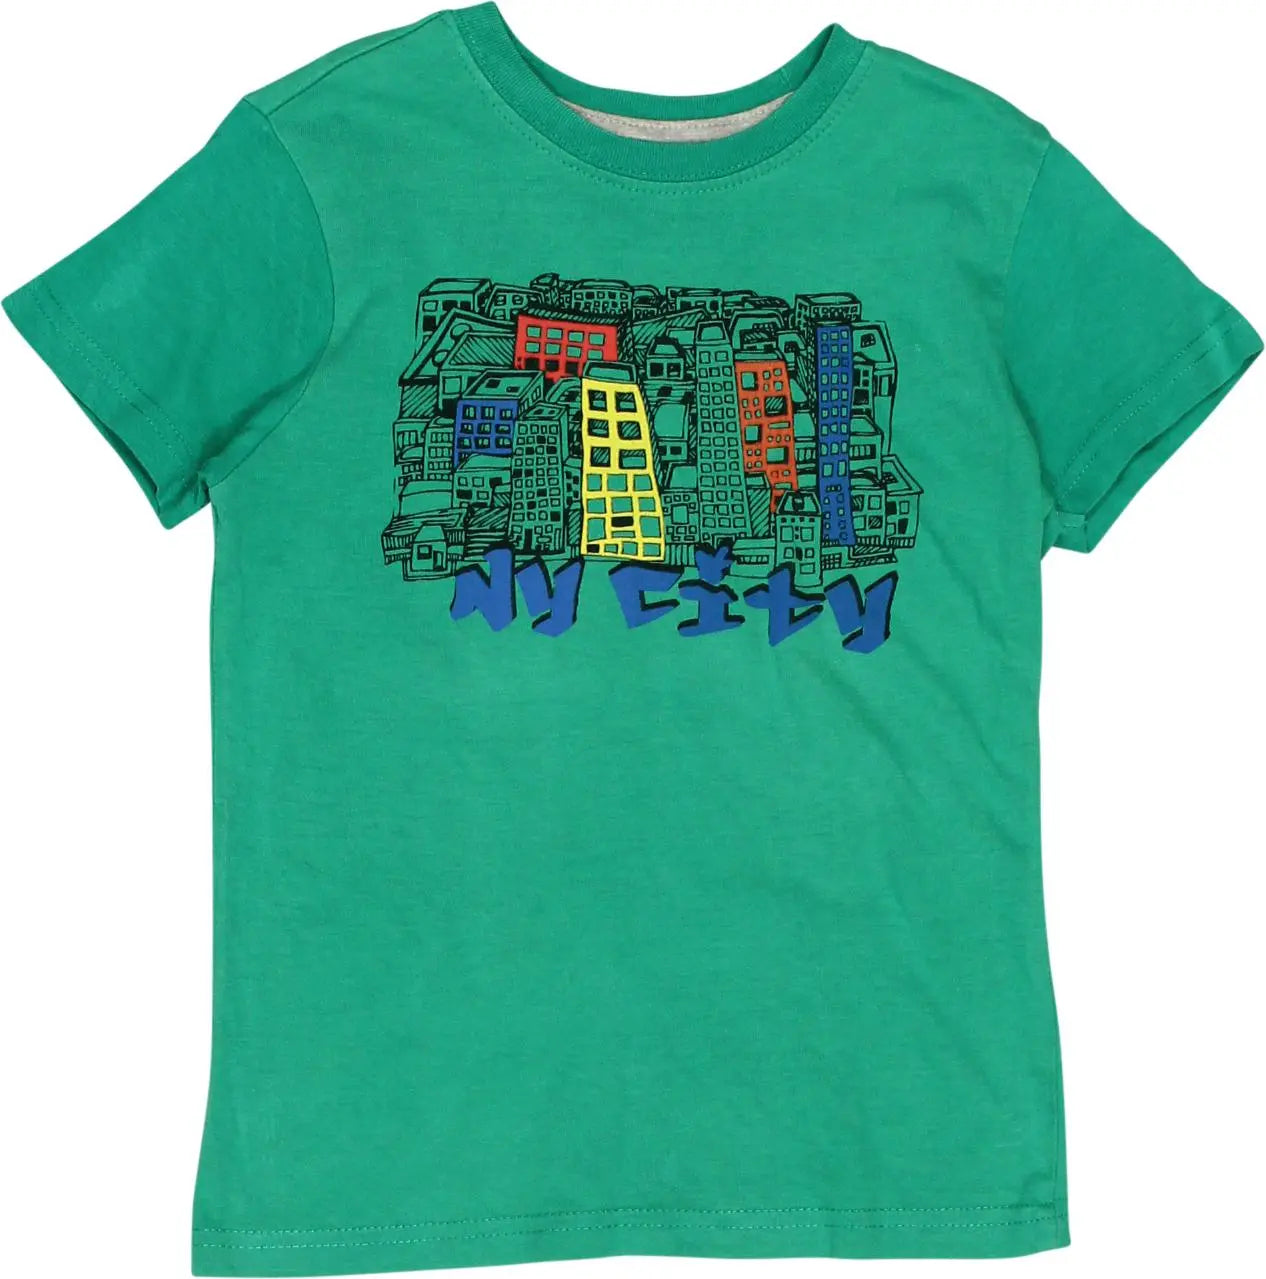 Zeeman - Green T-shirt- ThriftTale.com - Vintage and second handclothing